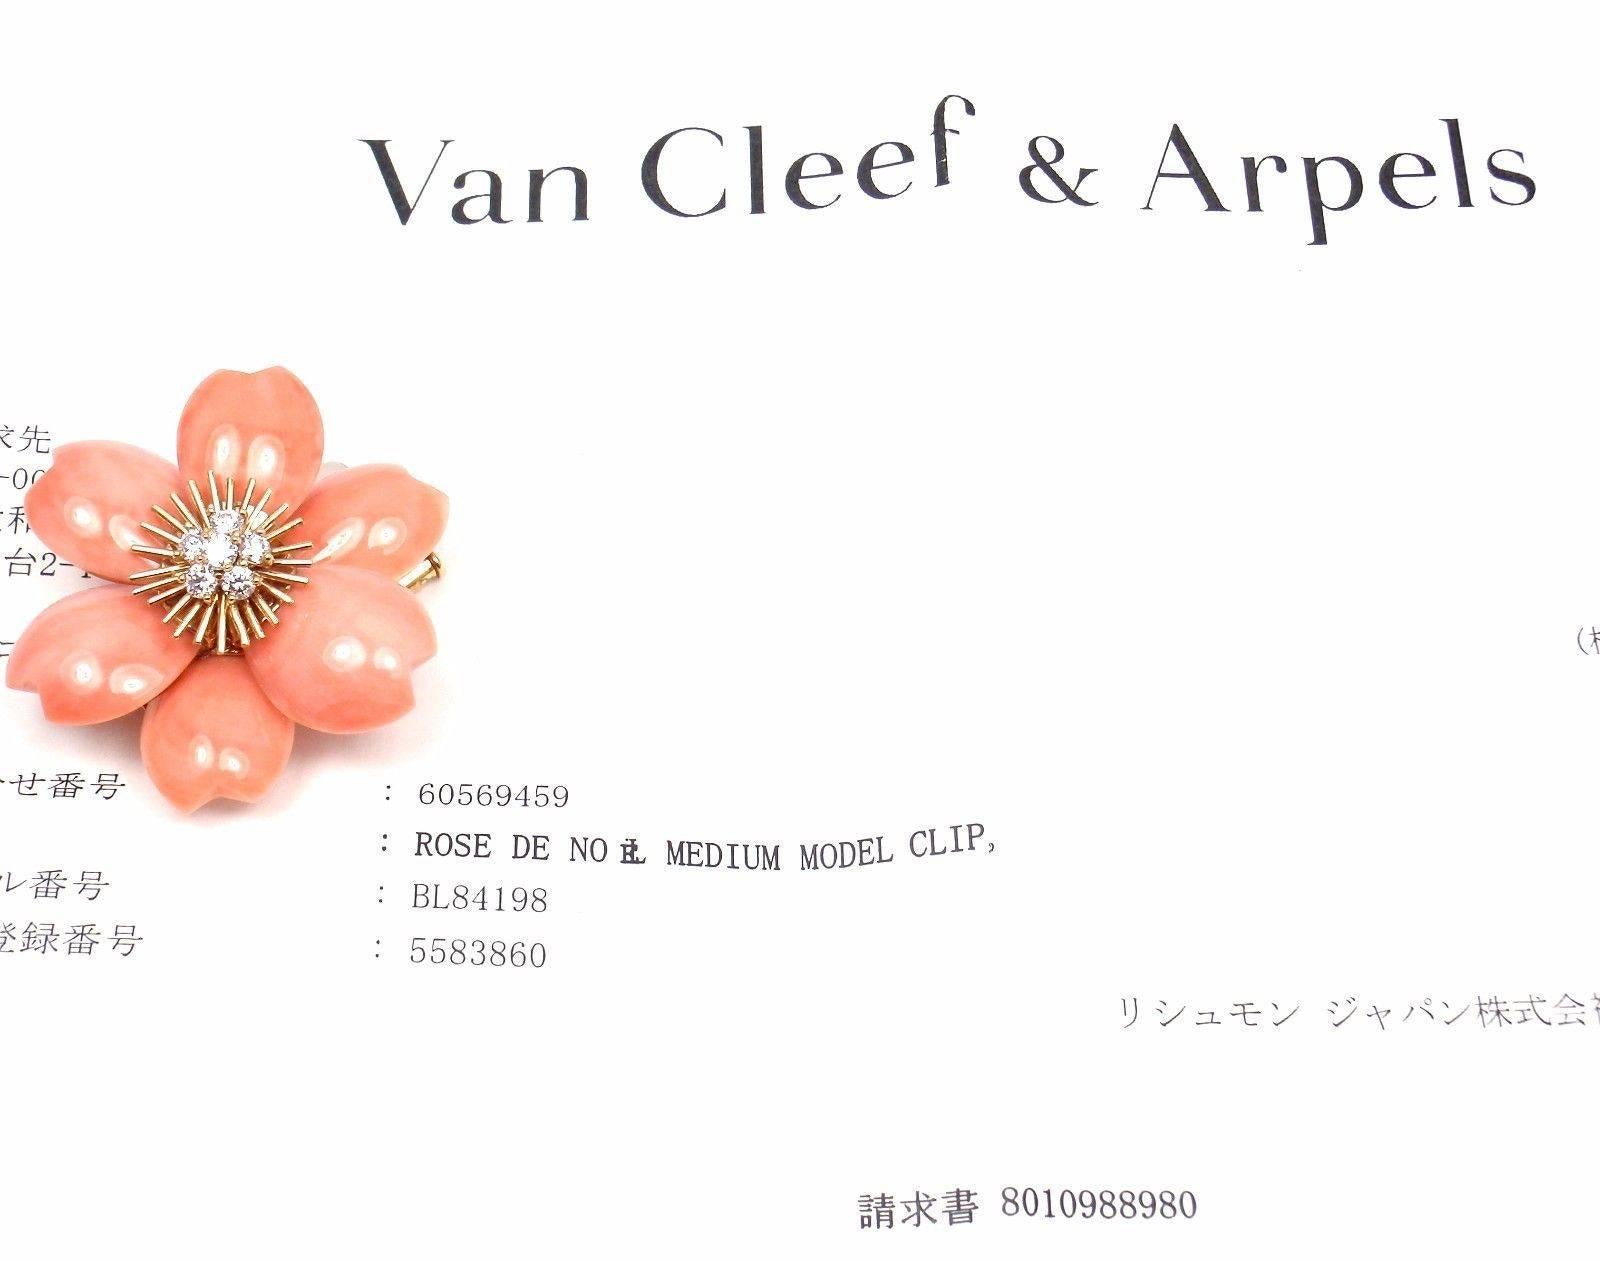 18k Yellow Gold Rose de Noel Diamond Coral Flower Medium Size Brooch by Van Cleef & Arpels. 
With 6 round brilliant cut diamonds VVS1 clarity, E color total weight approx. .48ct
6 coral stones
This brooch comes with Van Cleef & Arpels service